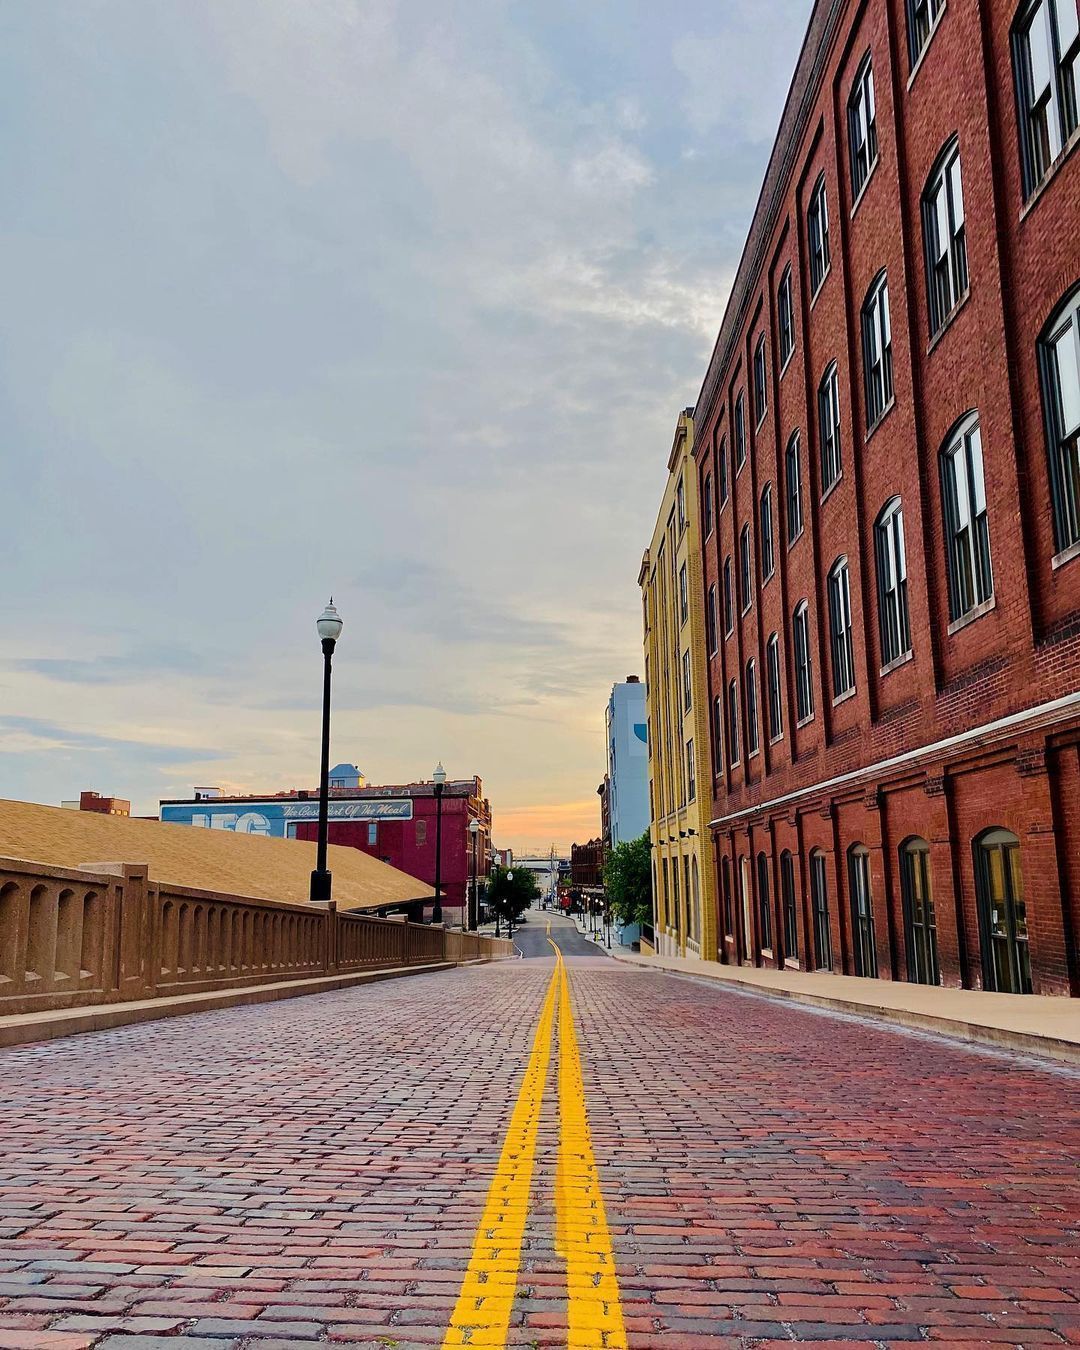 Historic Buildings in Old City Knoxville. Photo by Instagram user @downtownknox